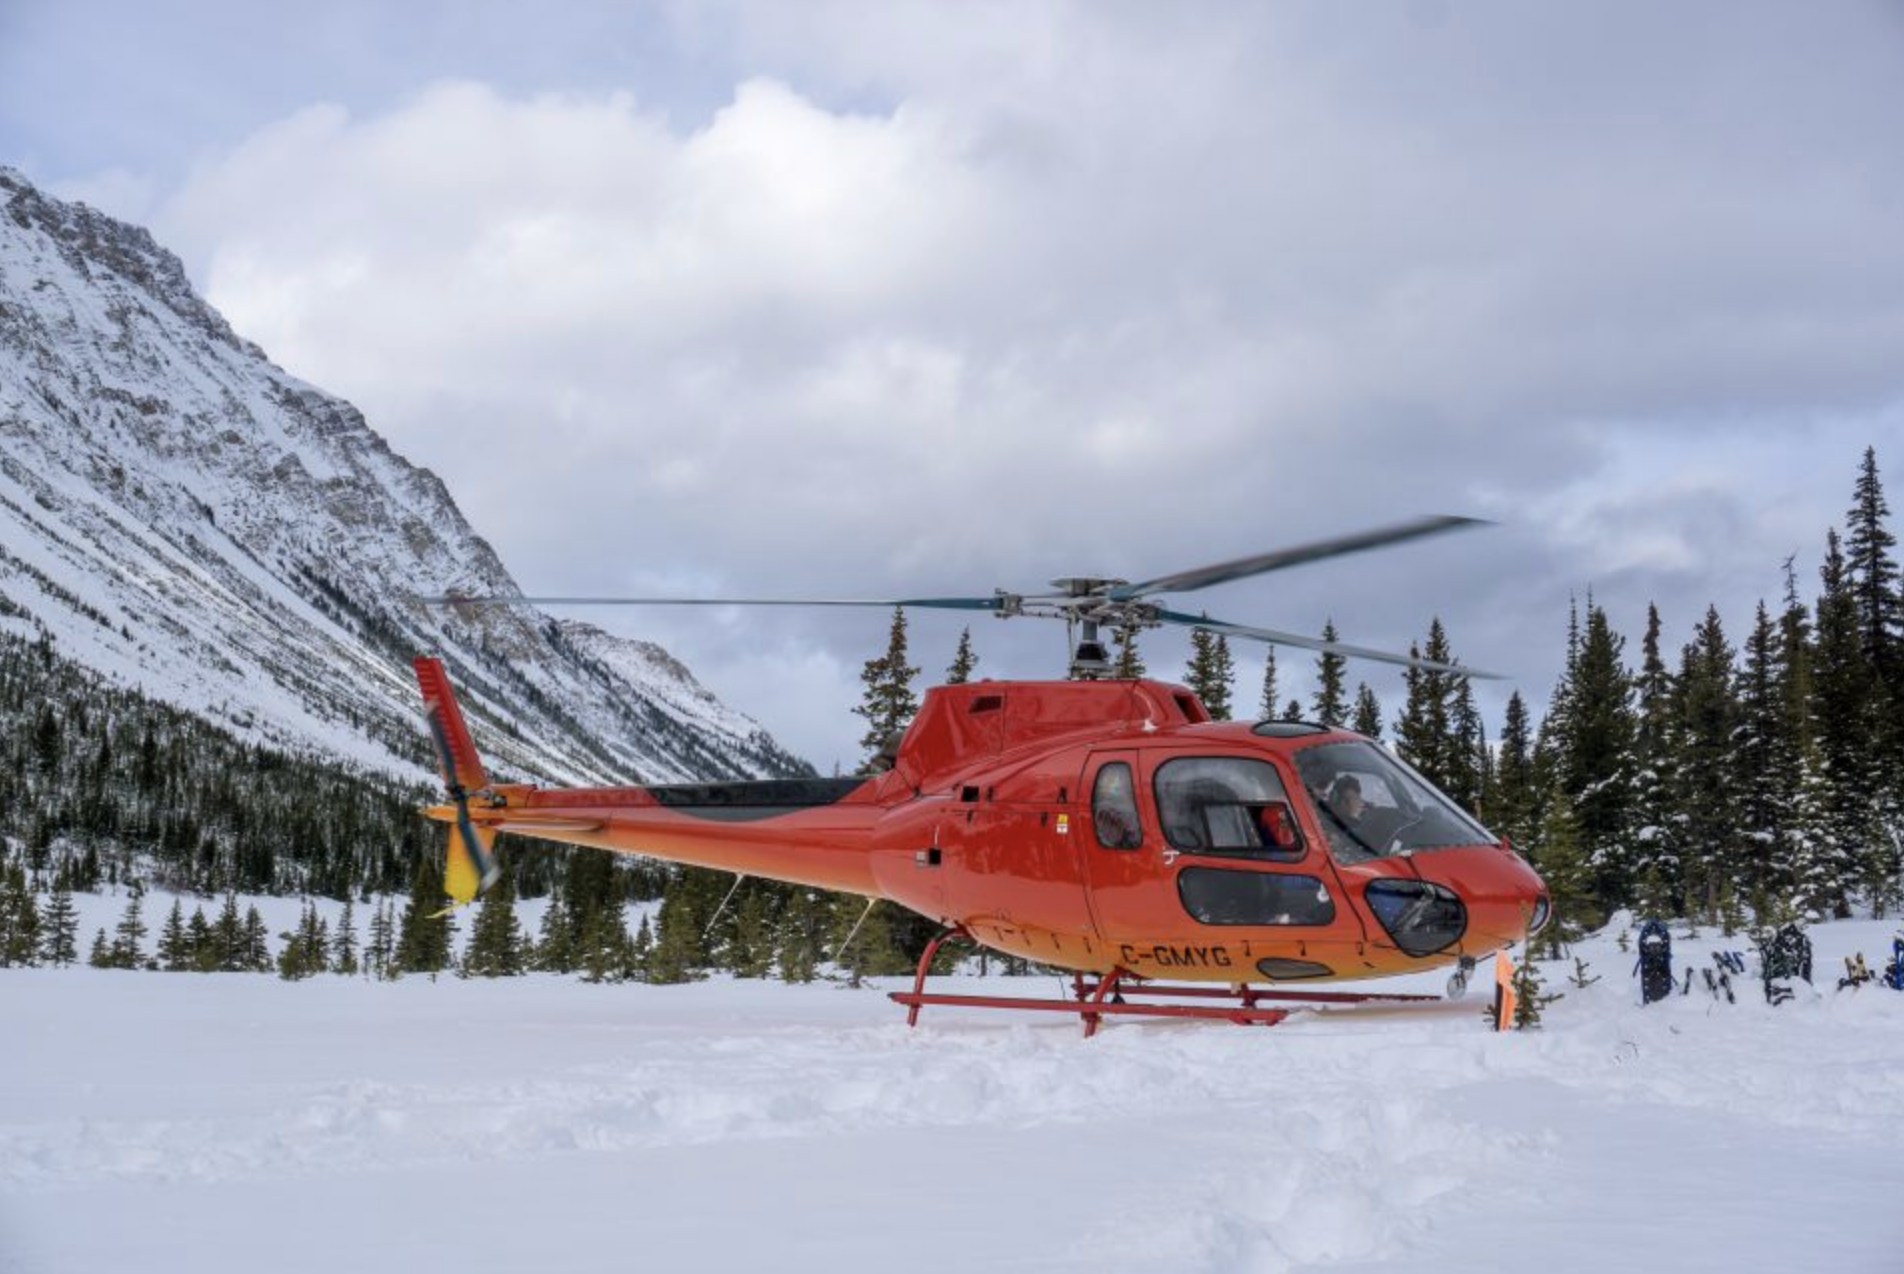 2. Canadian Rockies Scenic Winter Helicopter & Snowshoe Tour